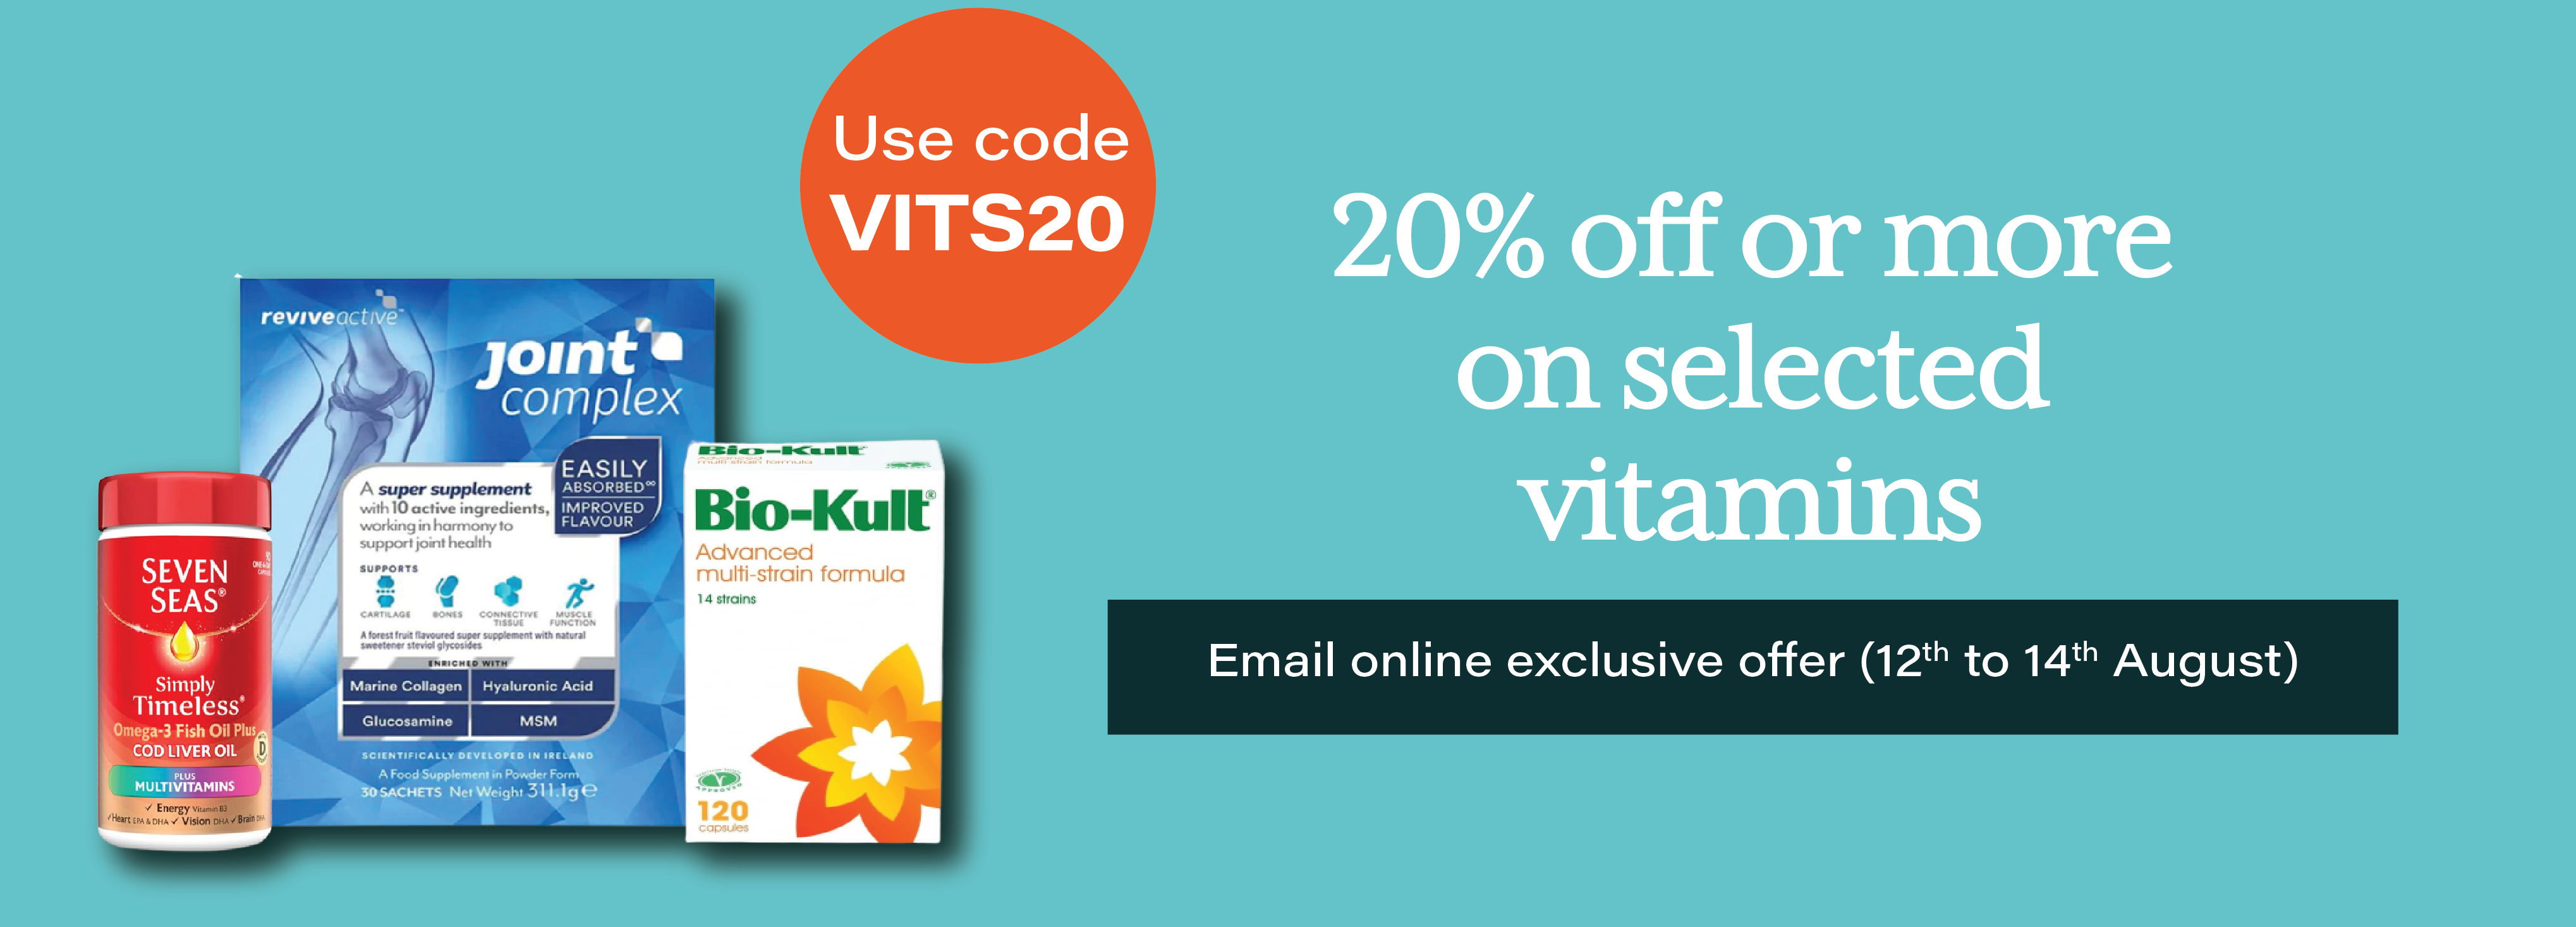 20% off selected vitamins - email exclusive